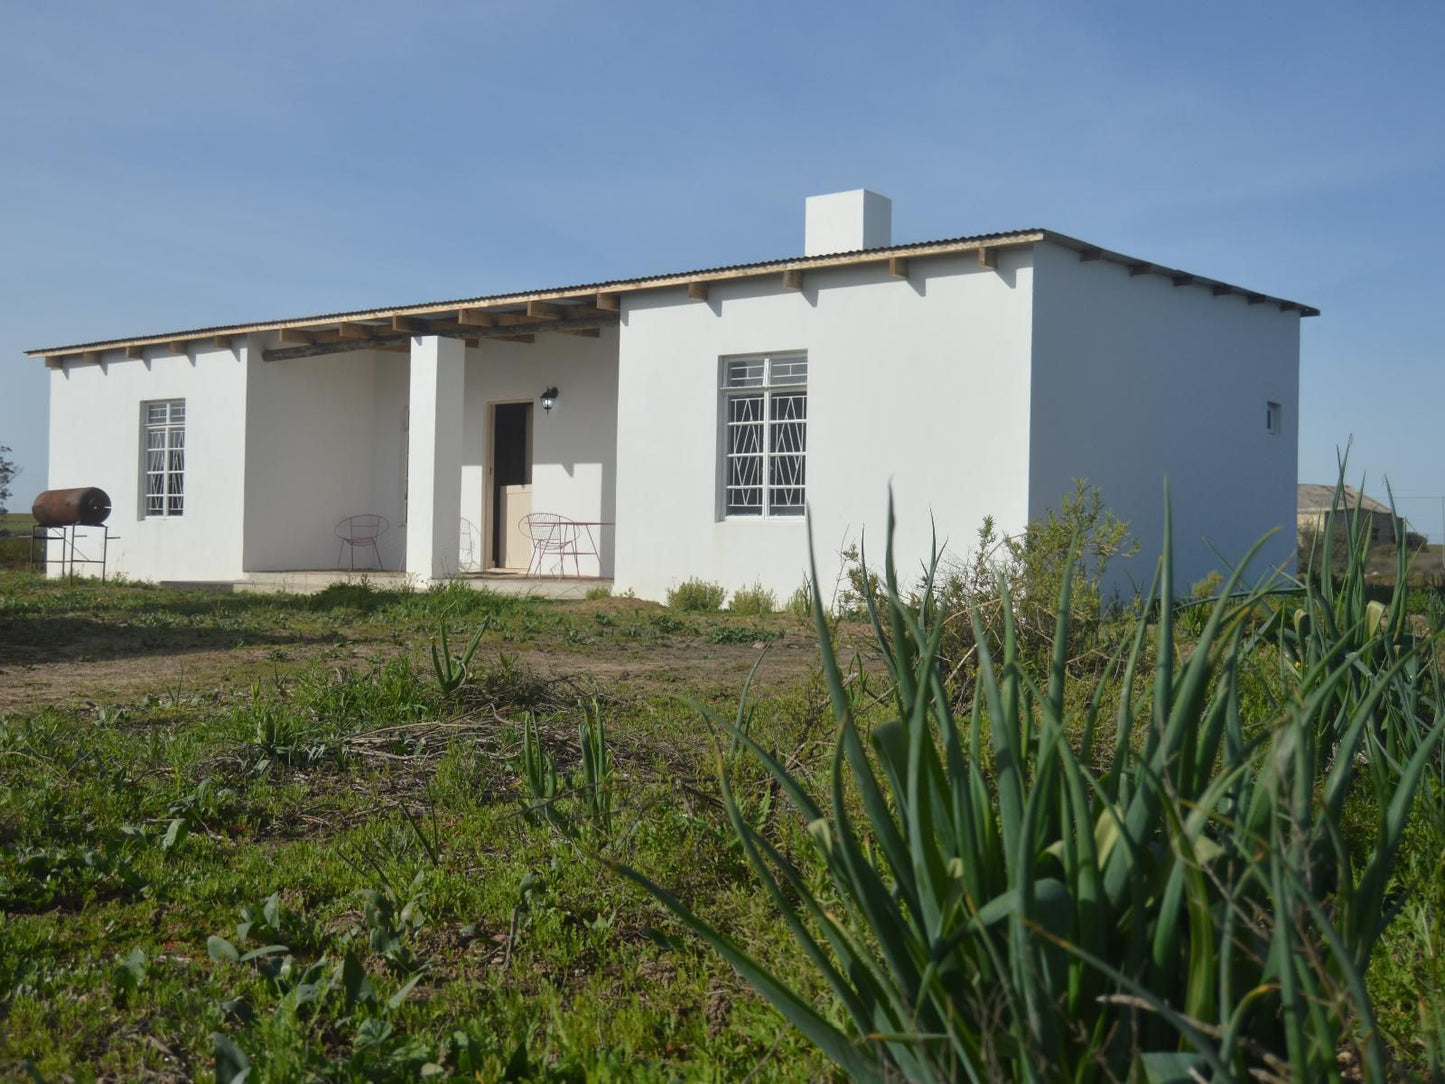 Willemsrivier Trekpad Guest Houses Nieuwoudtville Northern Cape South Africa Building, Architecture, House